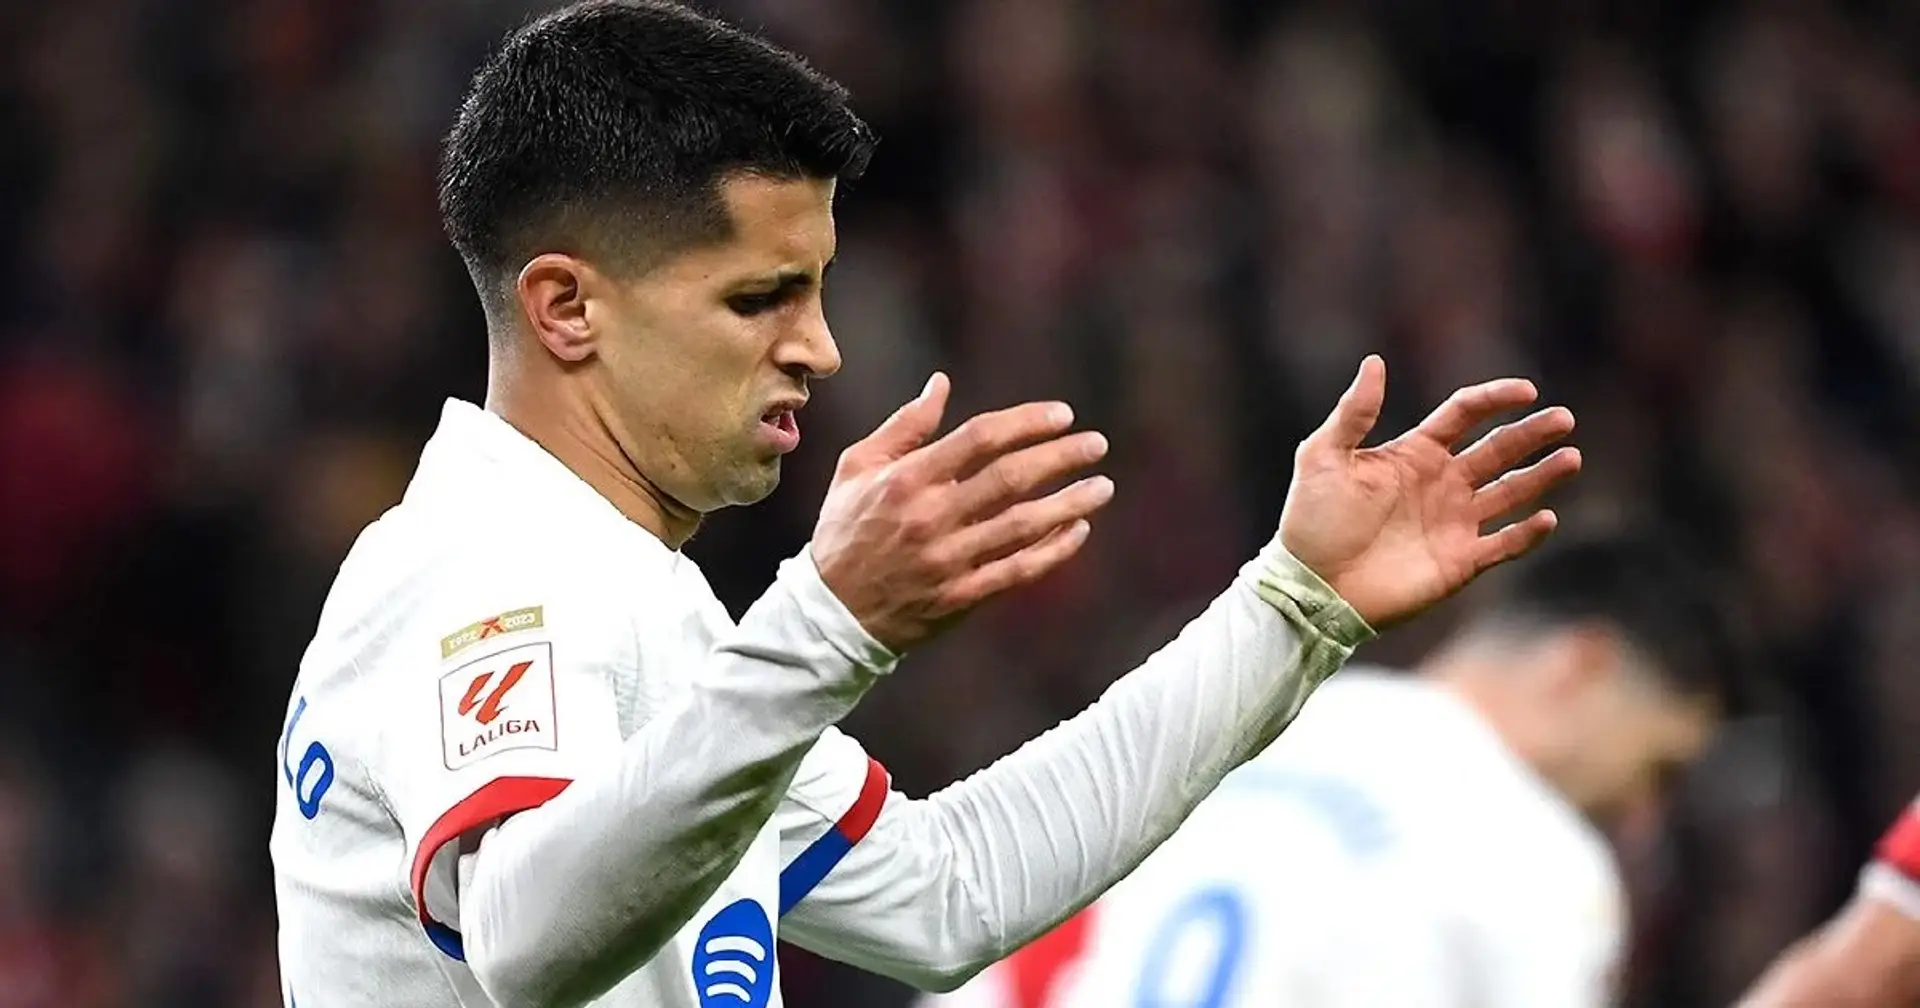 Will Joao Cancelo play again after protracted heart condition? 